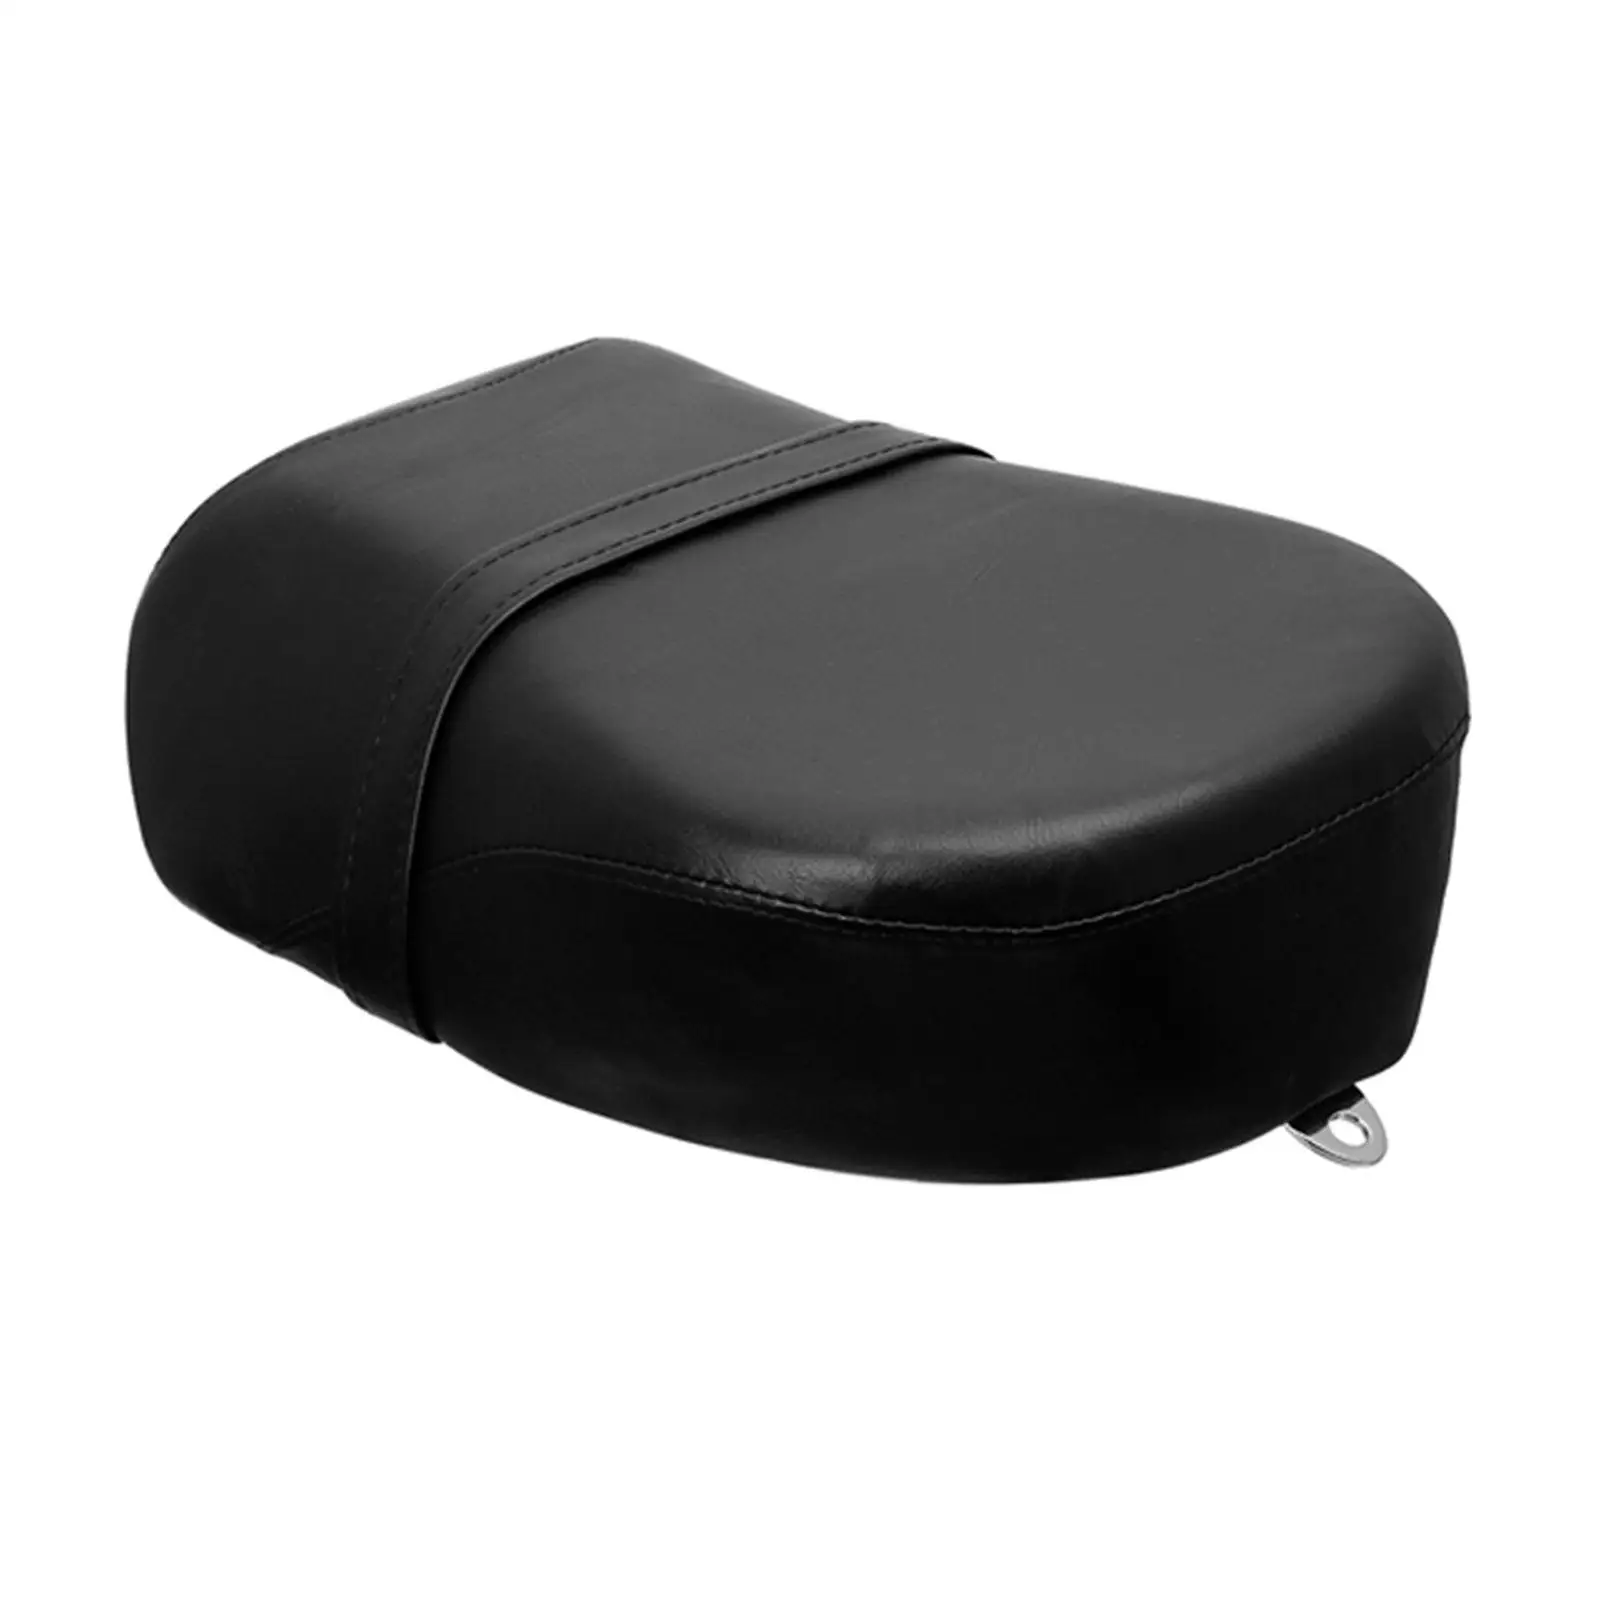 Motorcycle Rear Passenger Seat Cushion for Harley Sportster Spare Parts